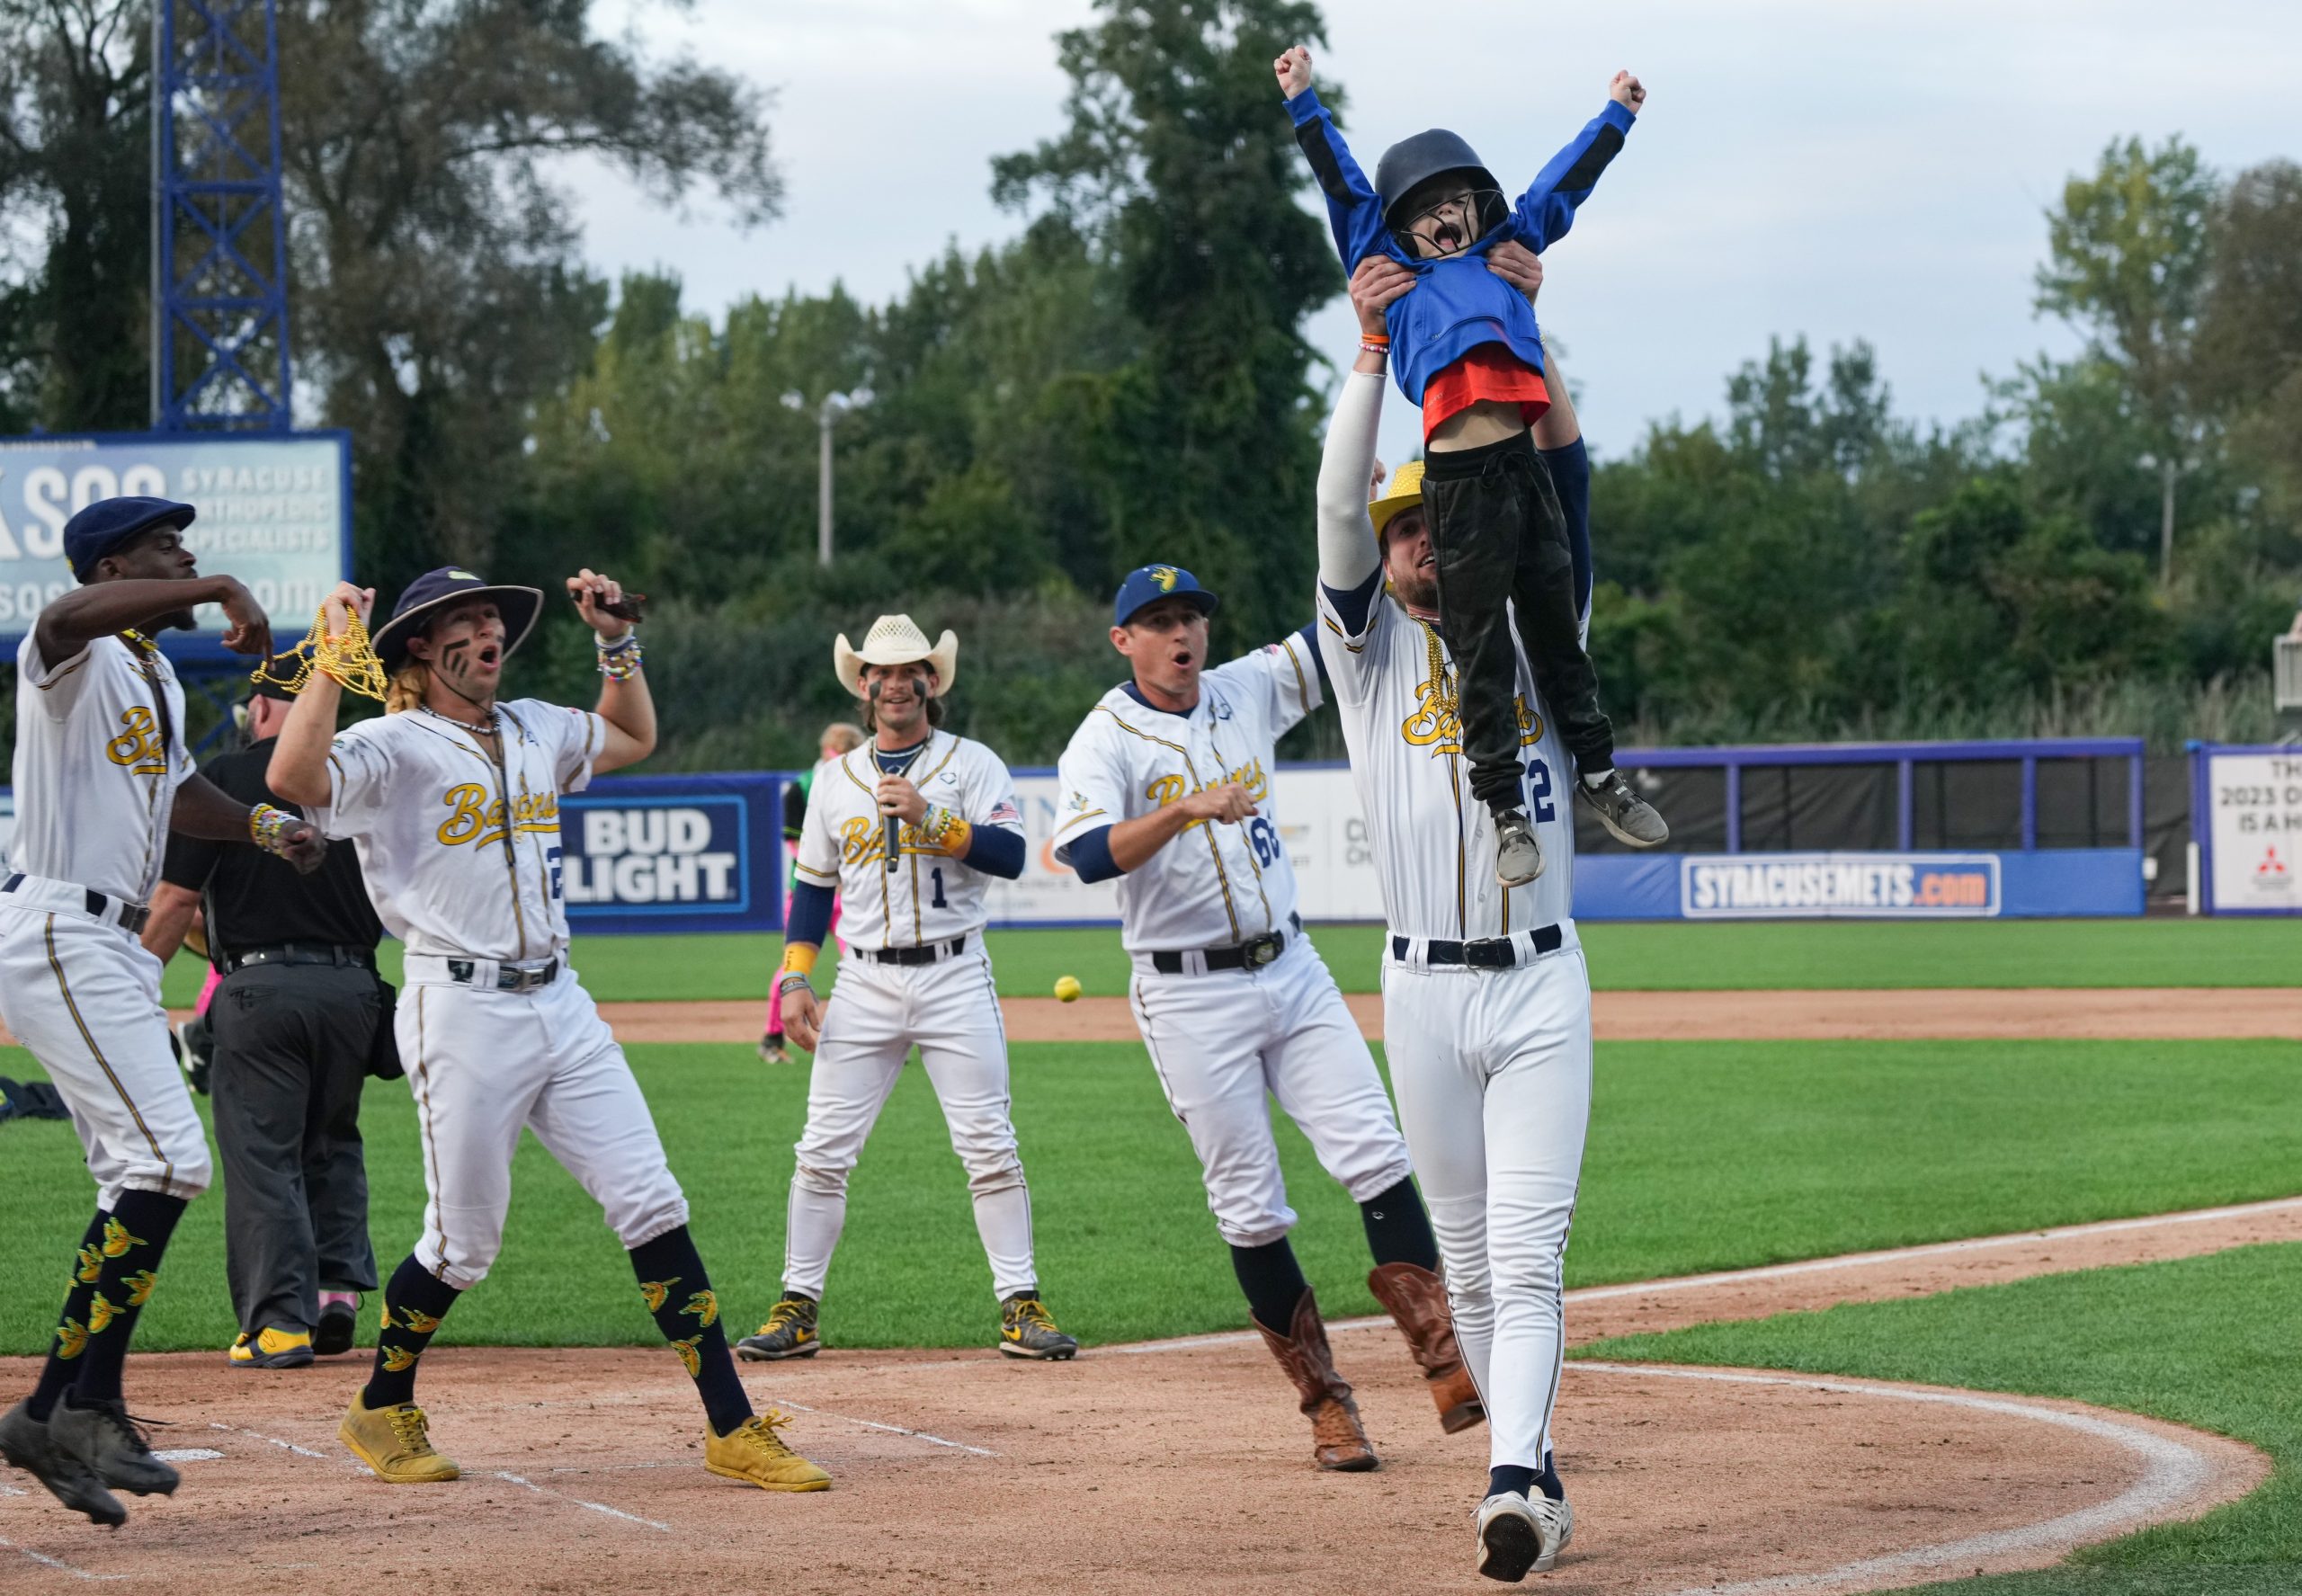 A child is held up after he ran the beasts for a home run after the hit a ball on a tee at the Savannah Banana’s baseball game held Thursday night, September 14, 2023 at NBT Stadium in Syracuse, NY.